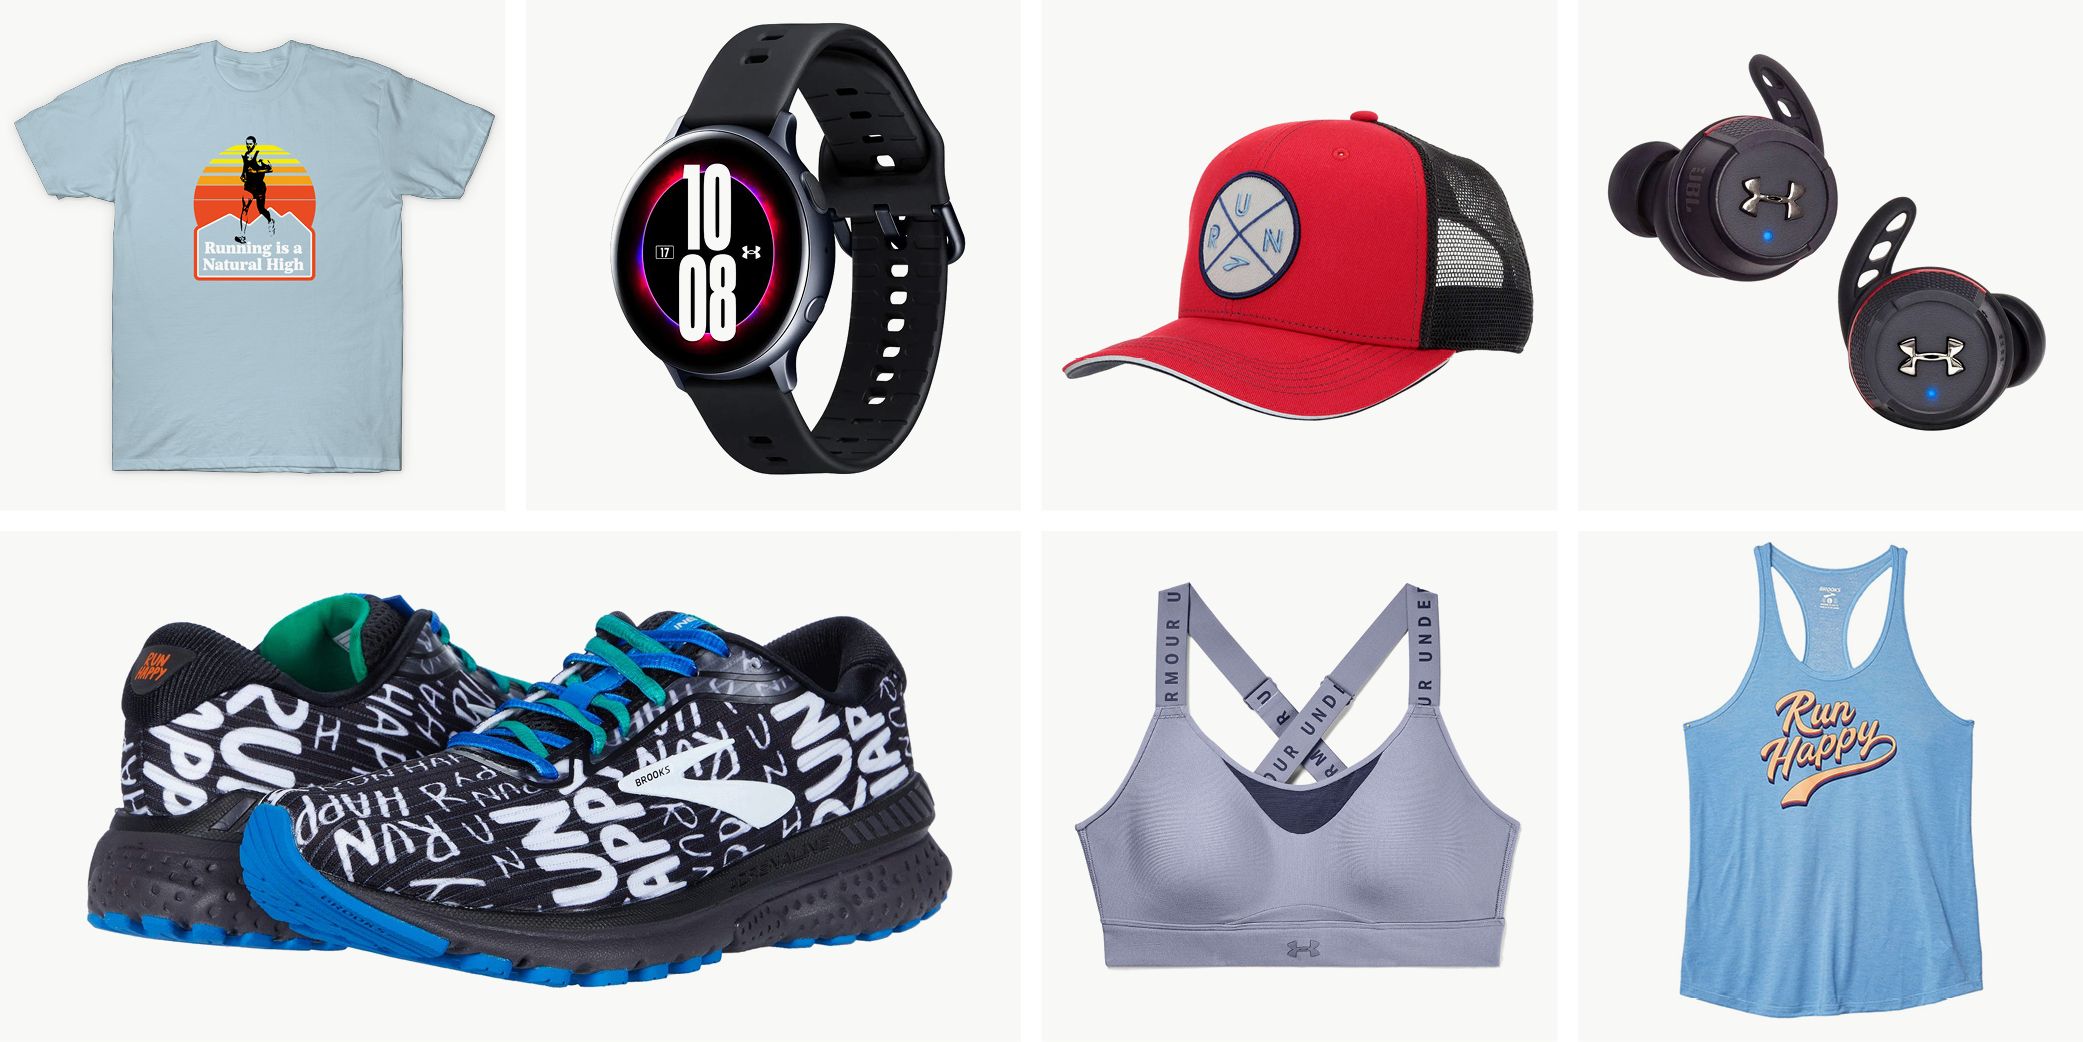 global running day discounts 219